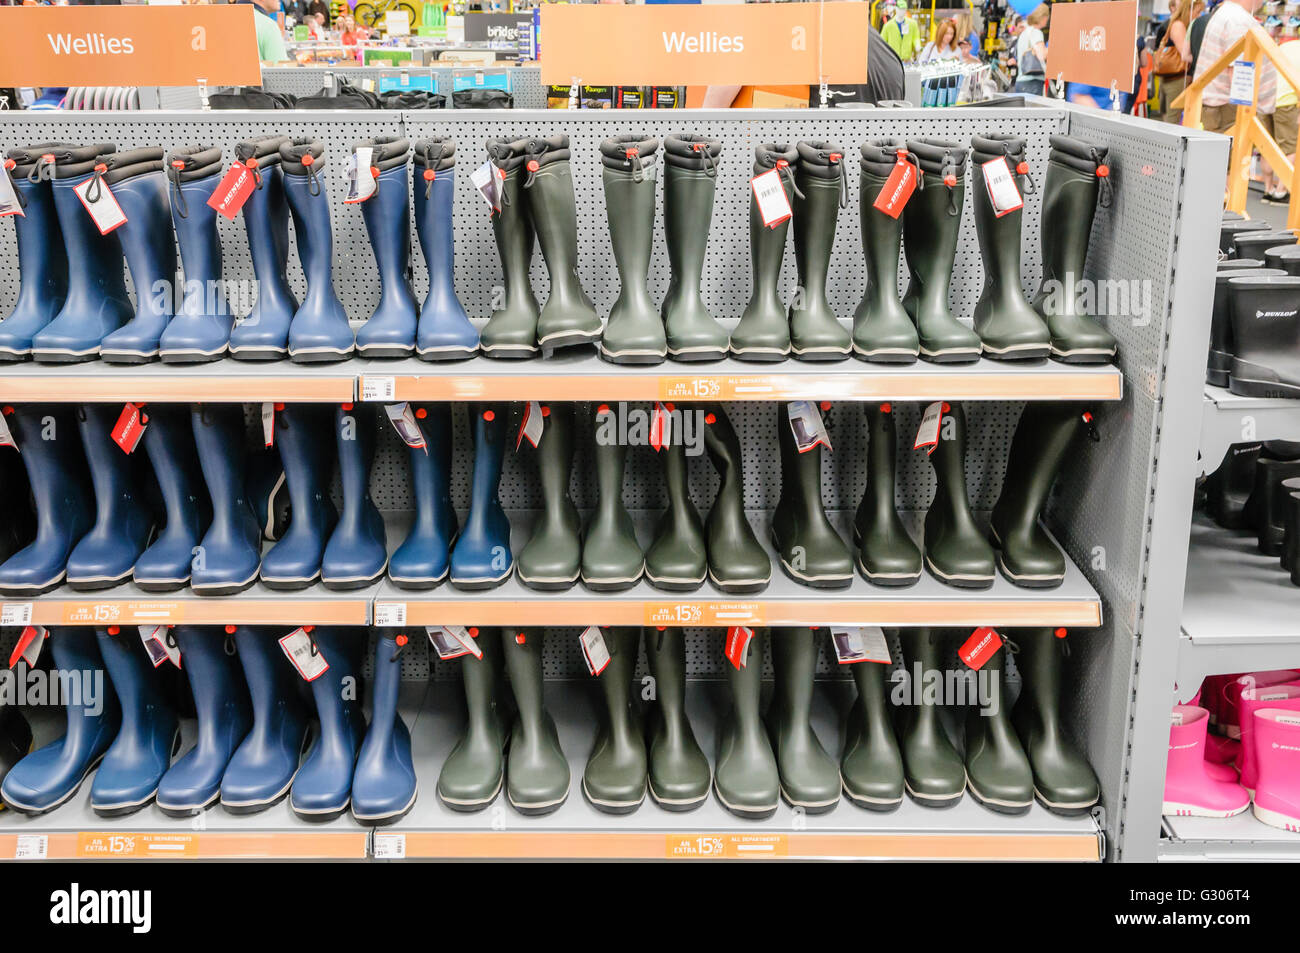 Wellington boots in the footwear section of Go Outdoors sports shop. Stock Photo